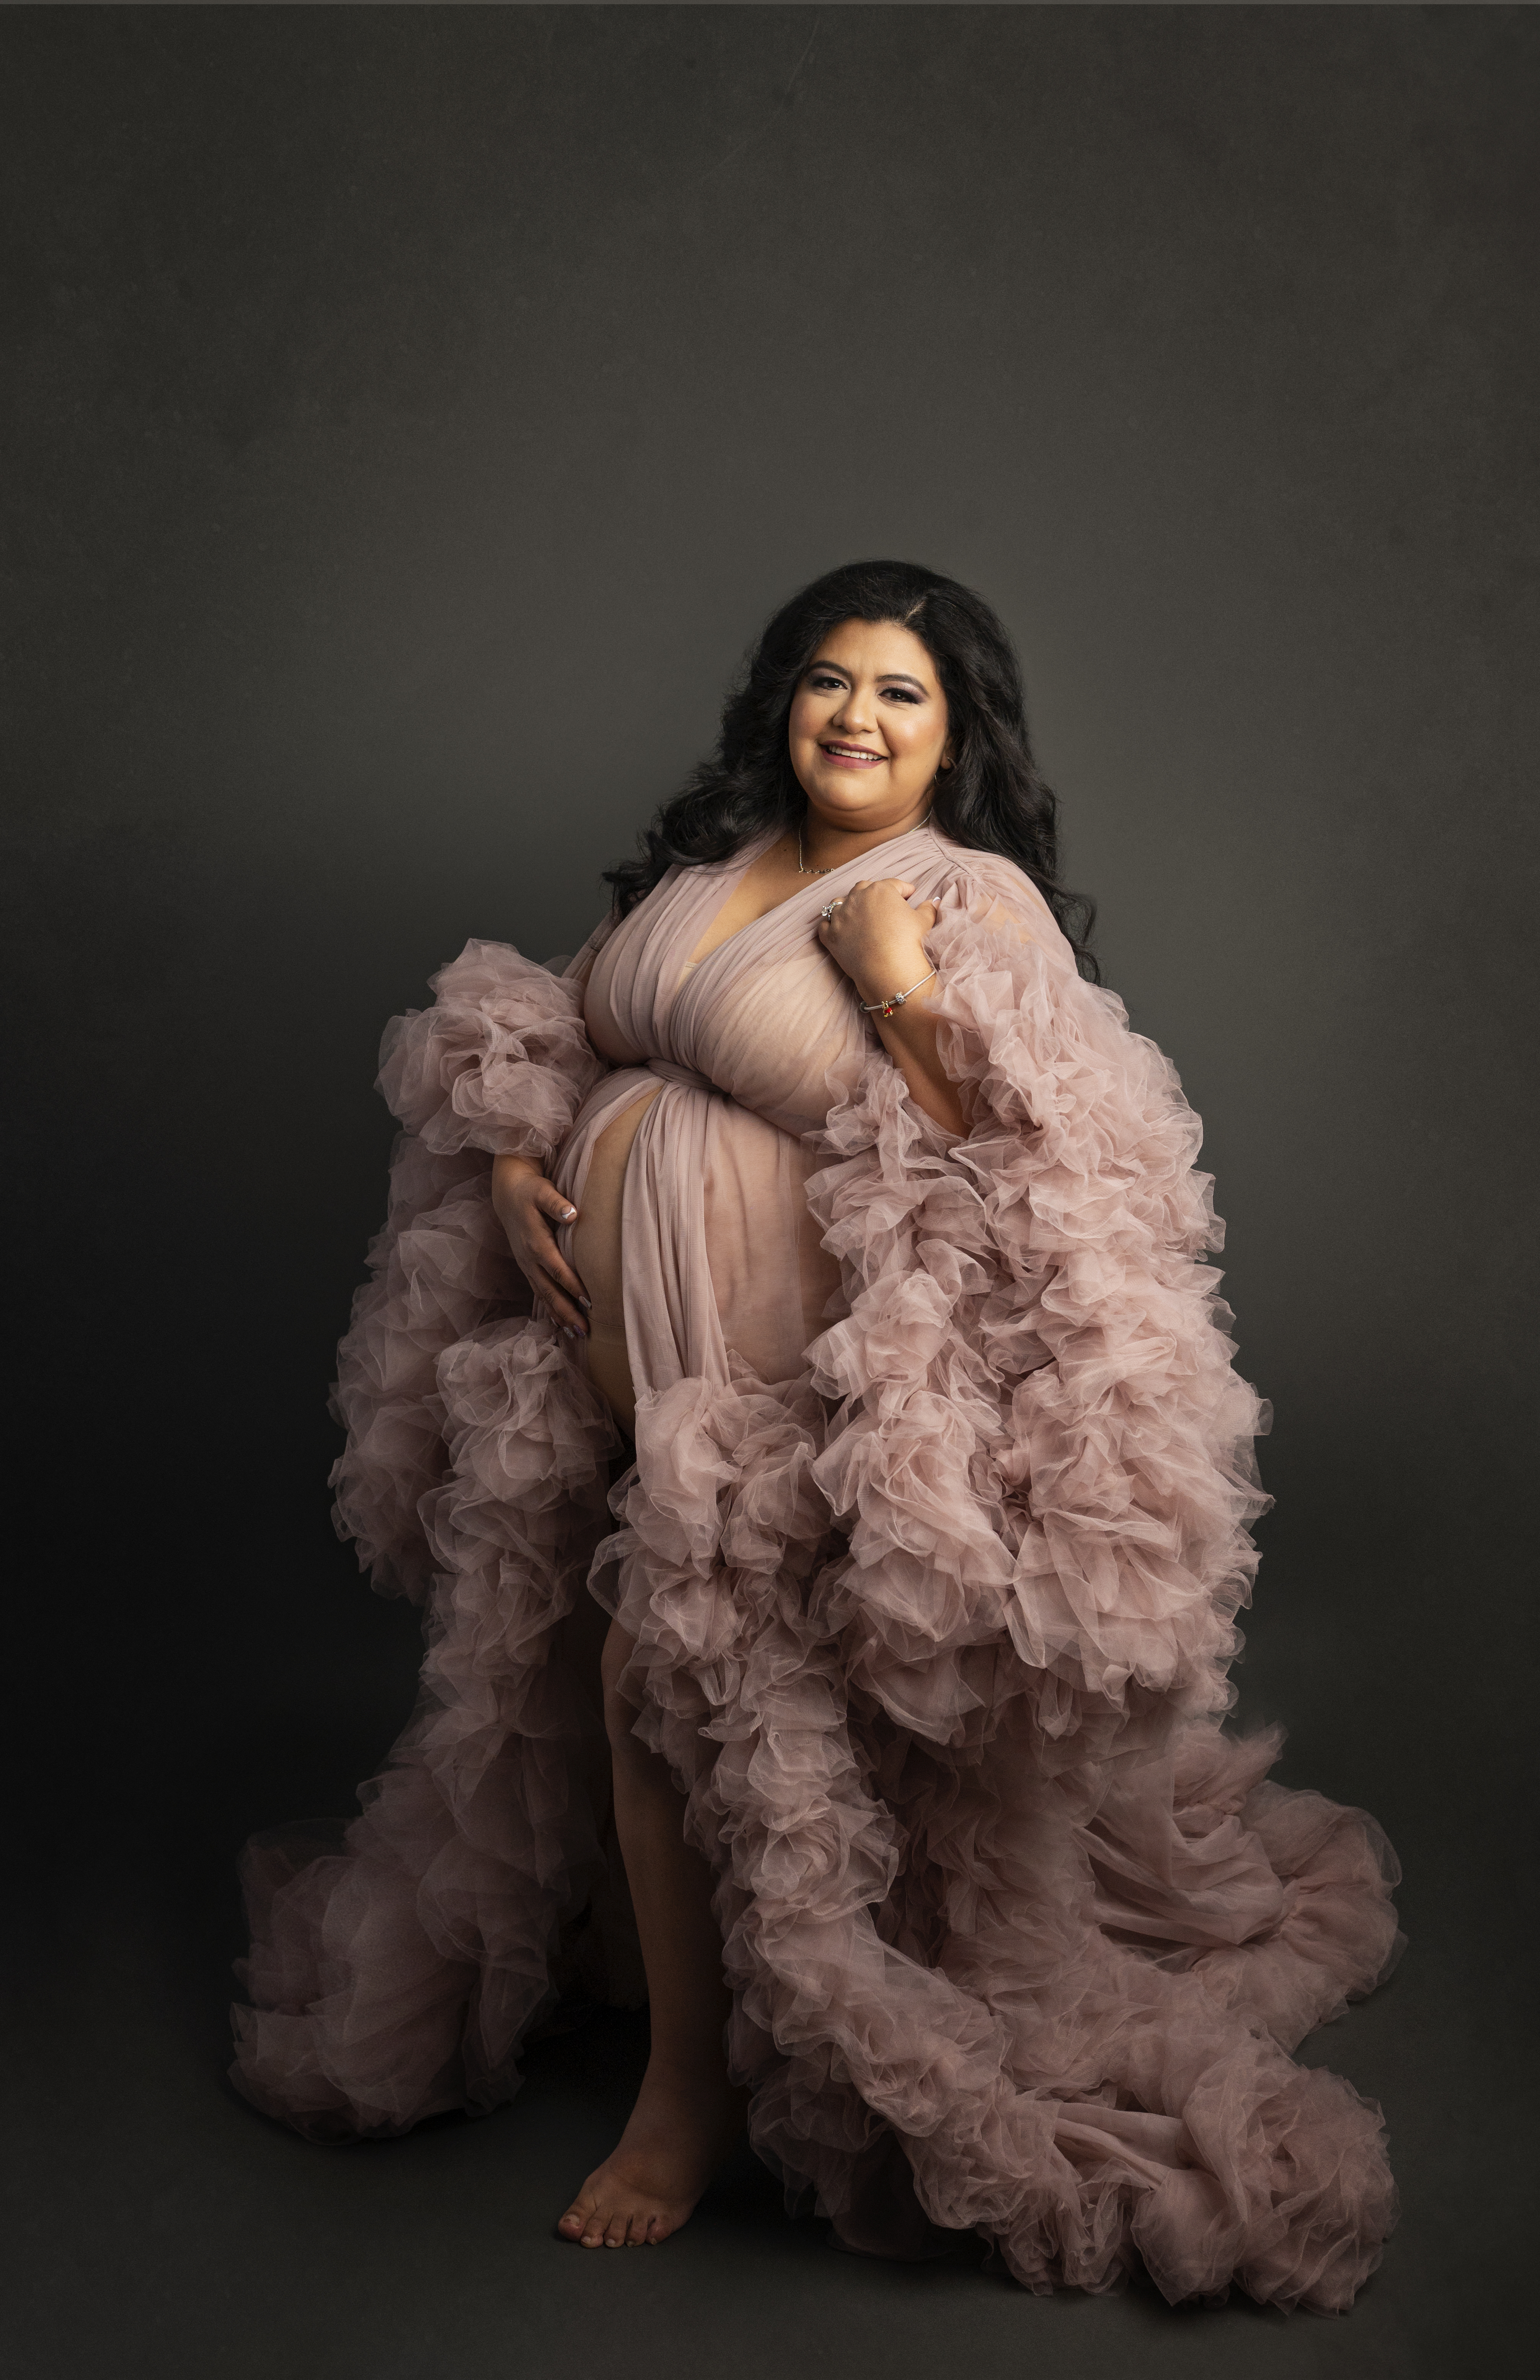 Grand rapids maternity photo session woman in pink gown holding baby bump and smiling